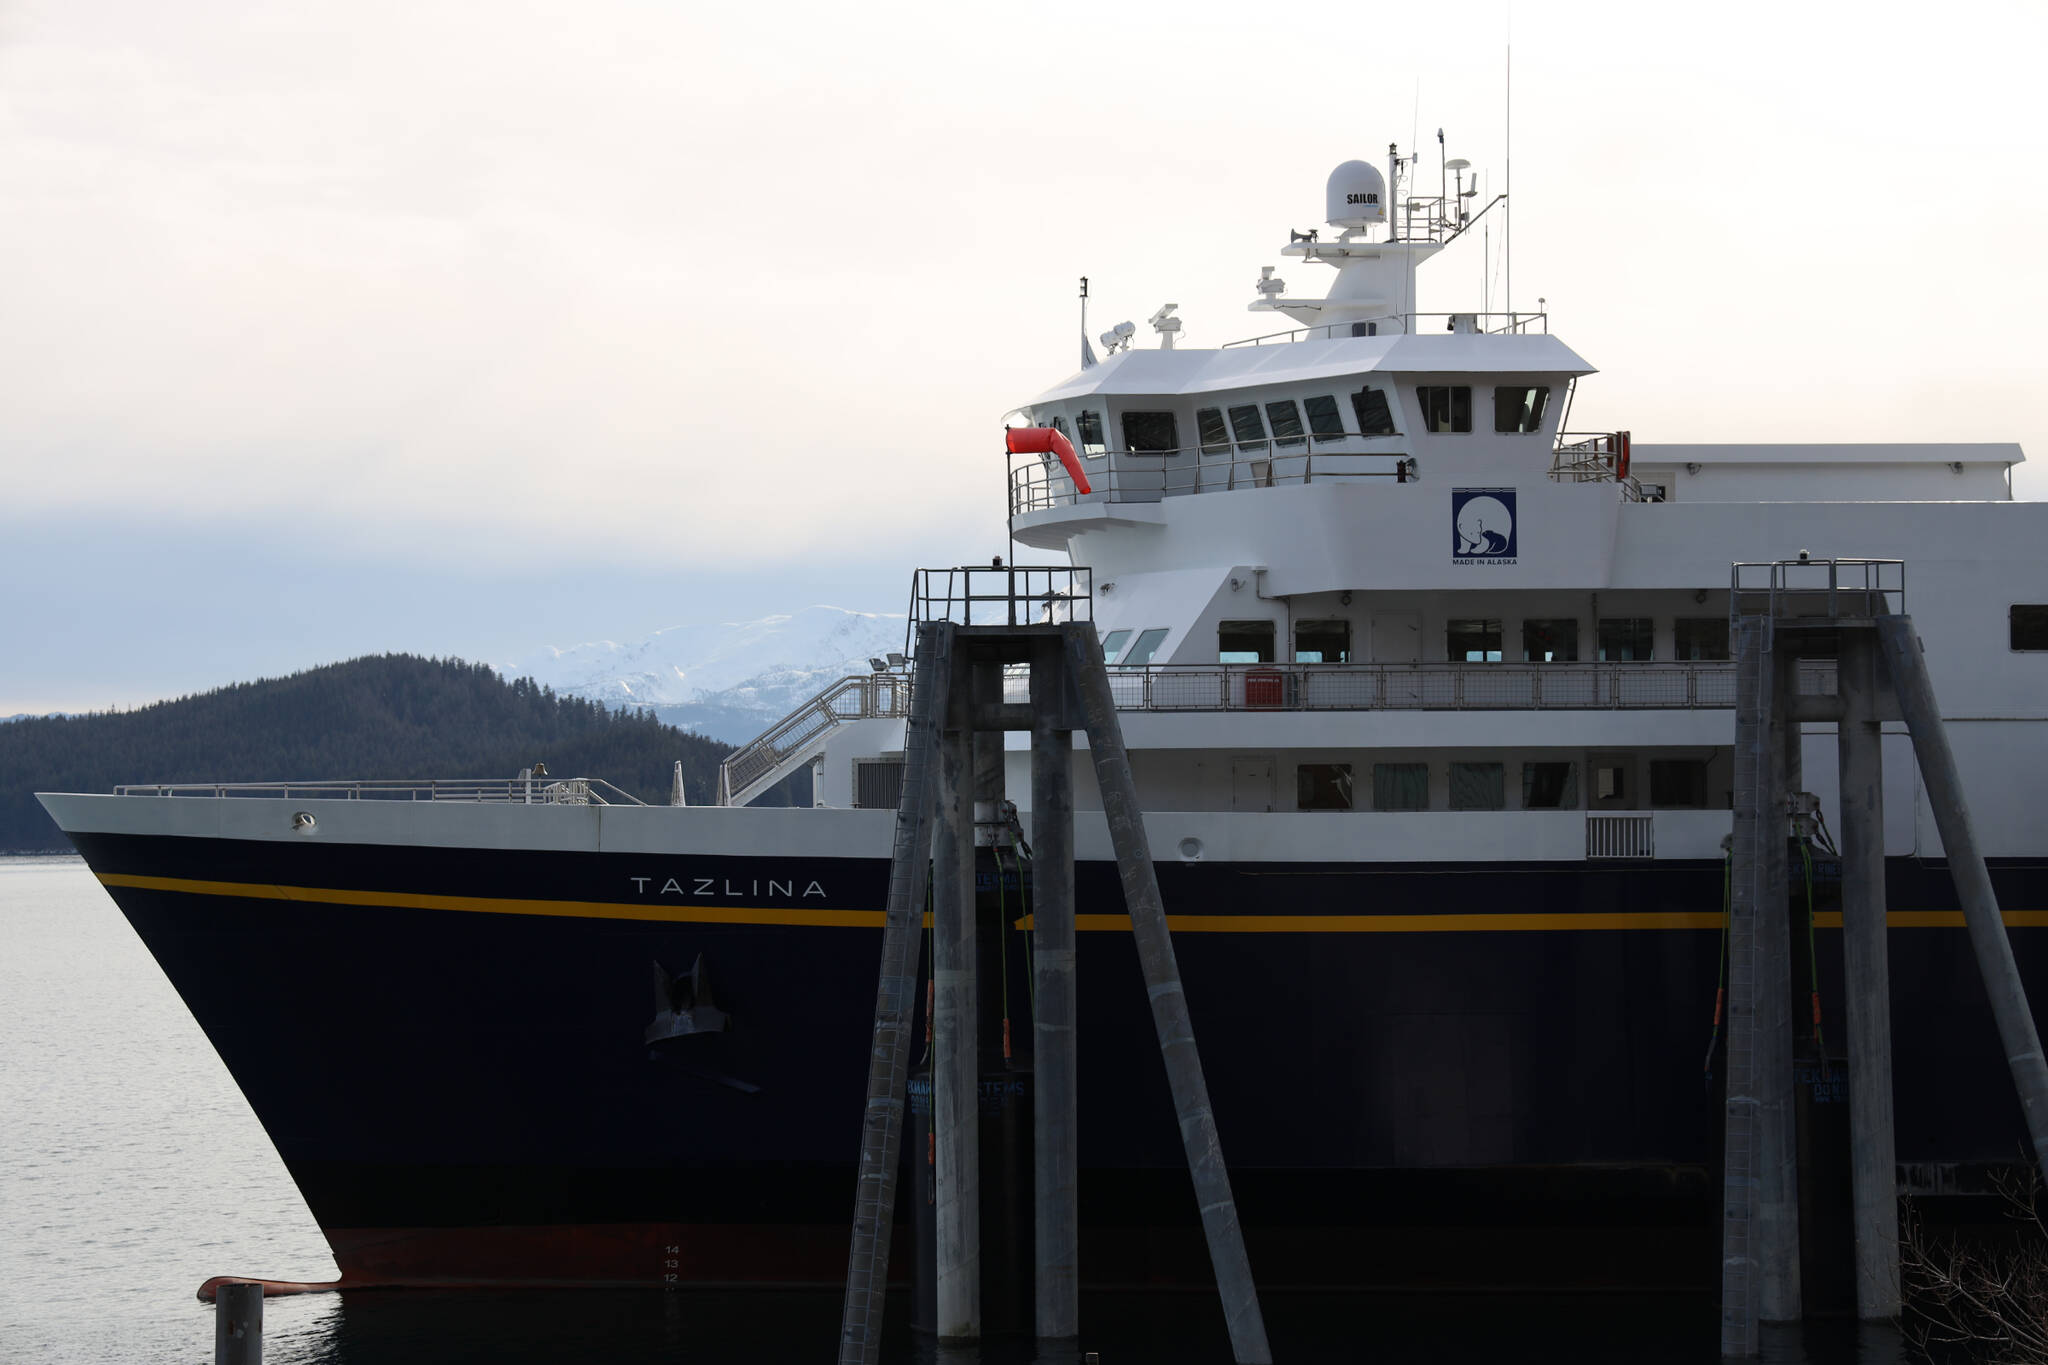 The Tazlina docks at the Auke Bay Ferry Terminal Thursday afternoon. (Clarise Larson / Juneau Empire)